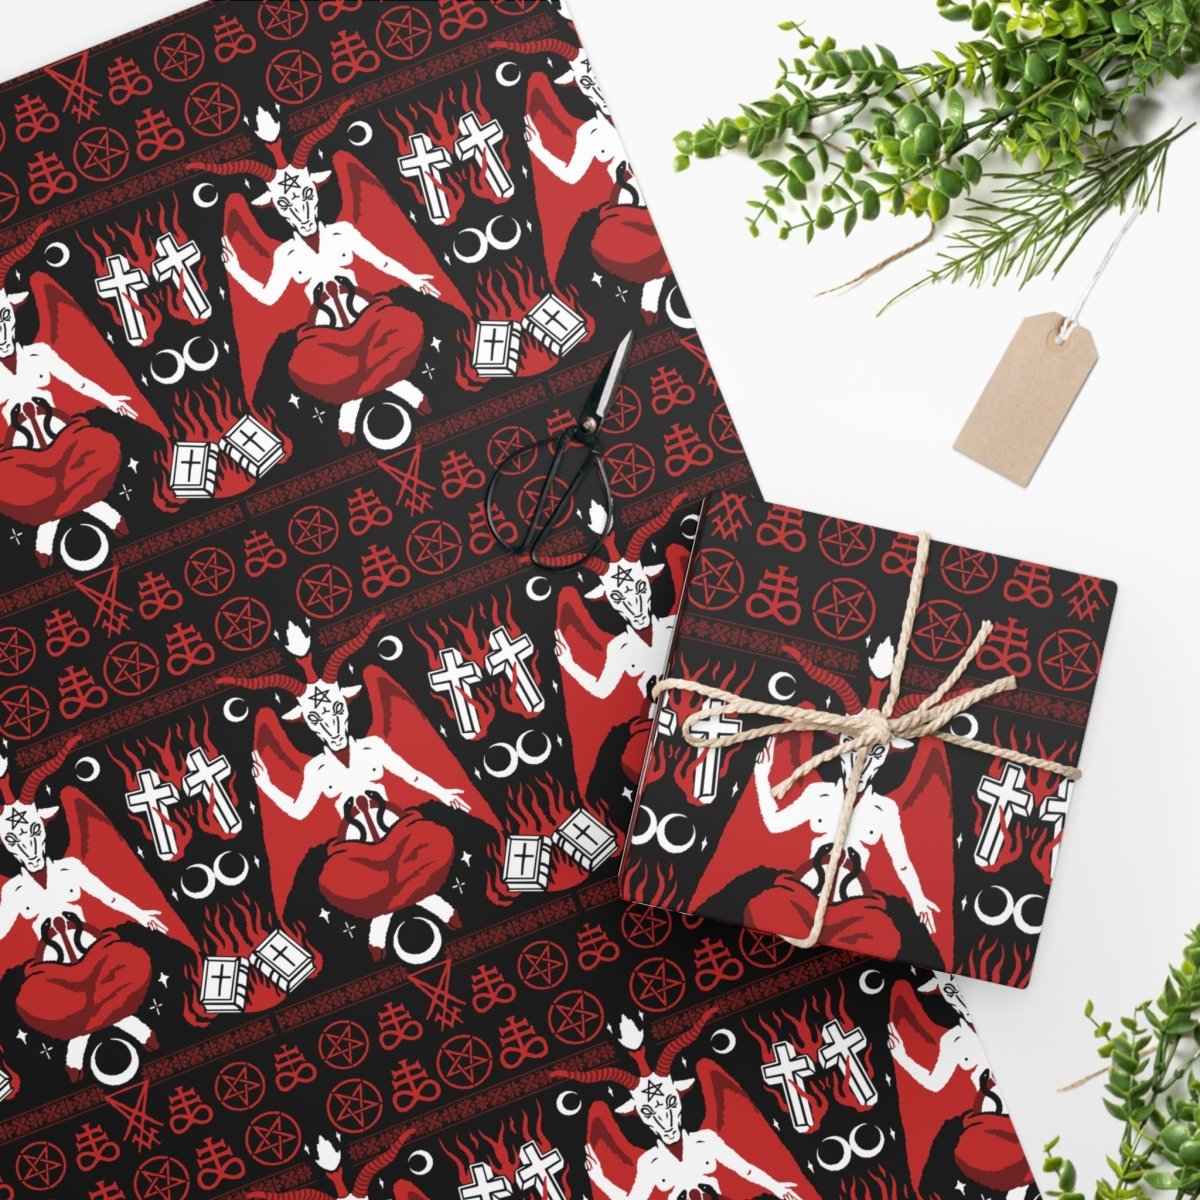 Too Fast | Baphoclaus Satanic Christmas Gift Wrapping Paper